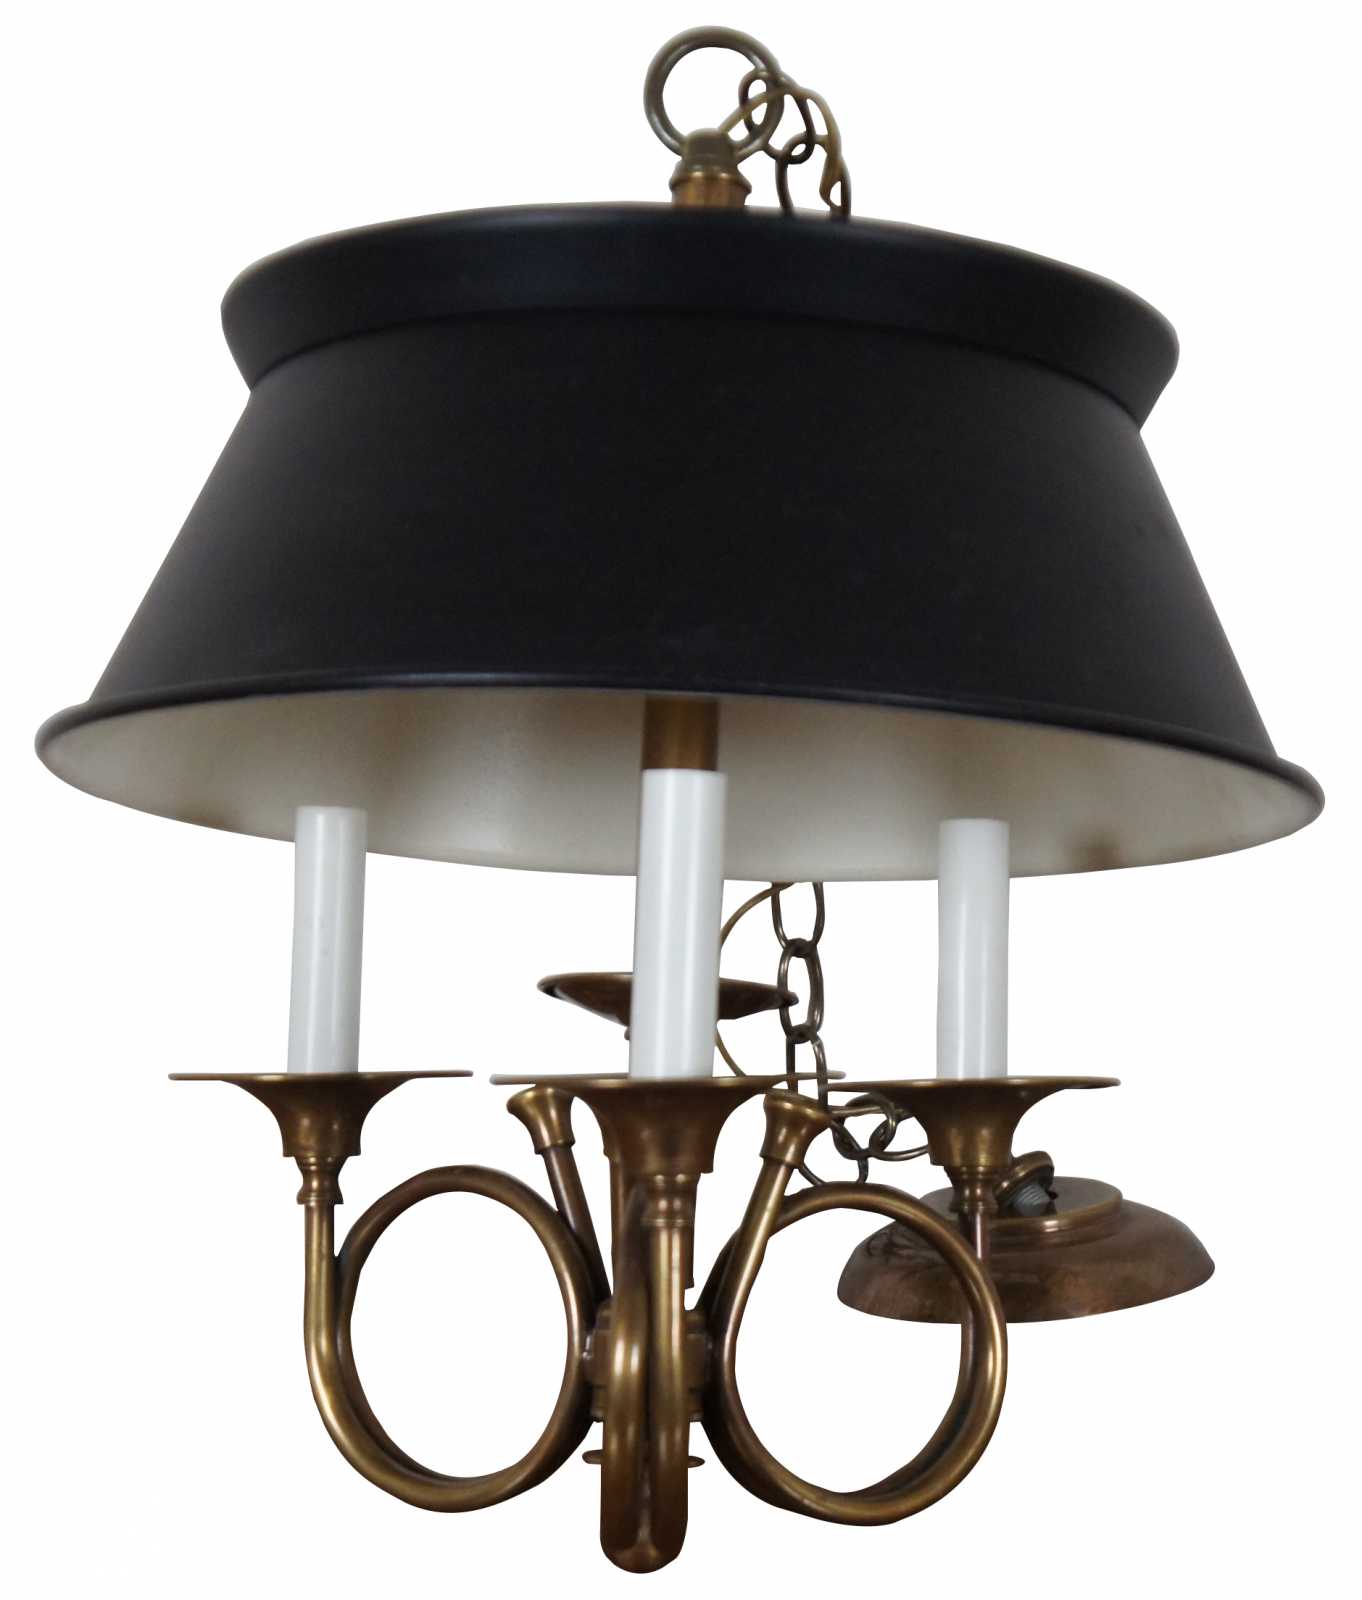 Mid-20th Century Brass Horn Bouillotte Lamp With Black Tole Shade 